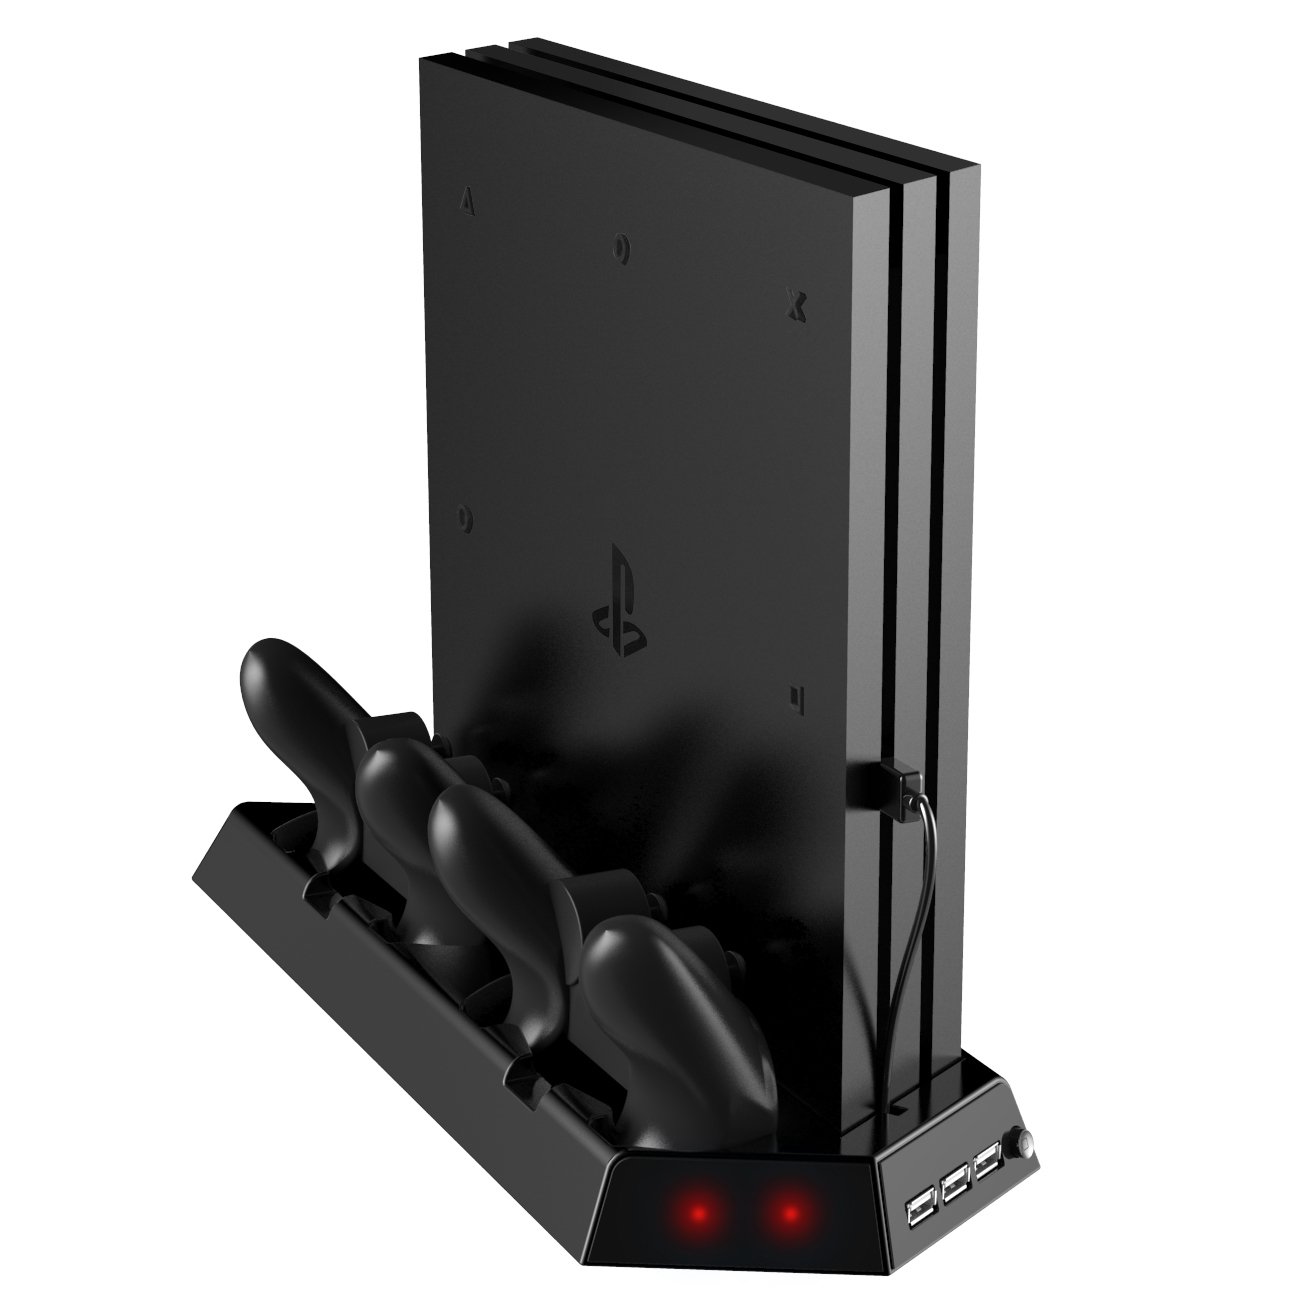 Book Cover Kootek Vertical Stand for PS4 Pro with Cooling Fan, Controller Charging Station for Sony Playstation 4 Pro Game Console, Charger for Dualshock 4 (Not for Regular PS4/Slim)